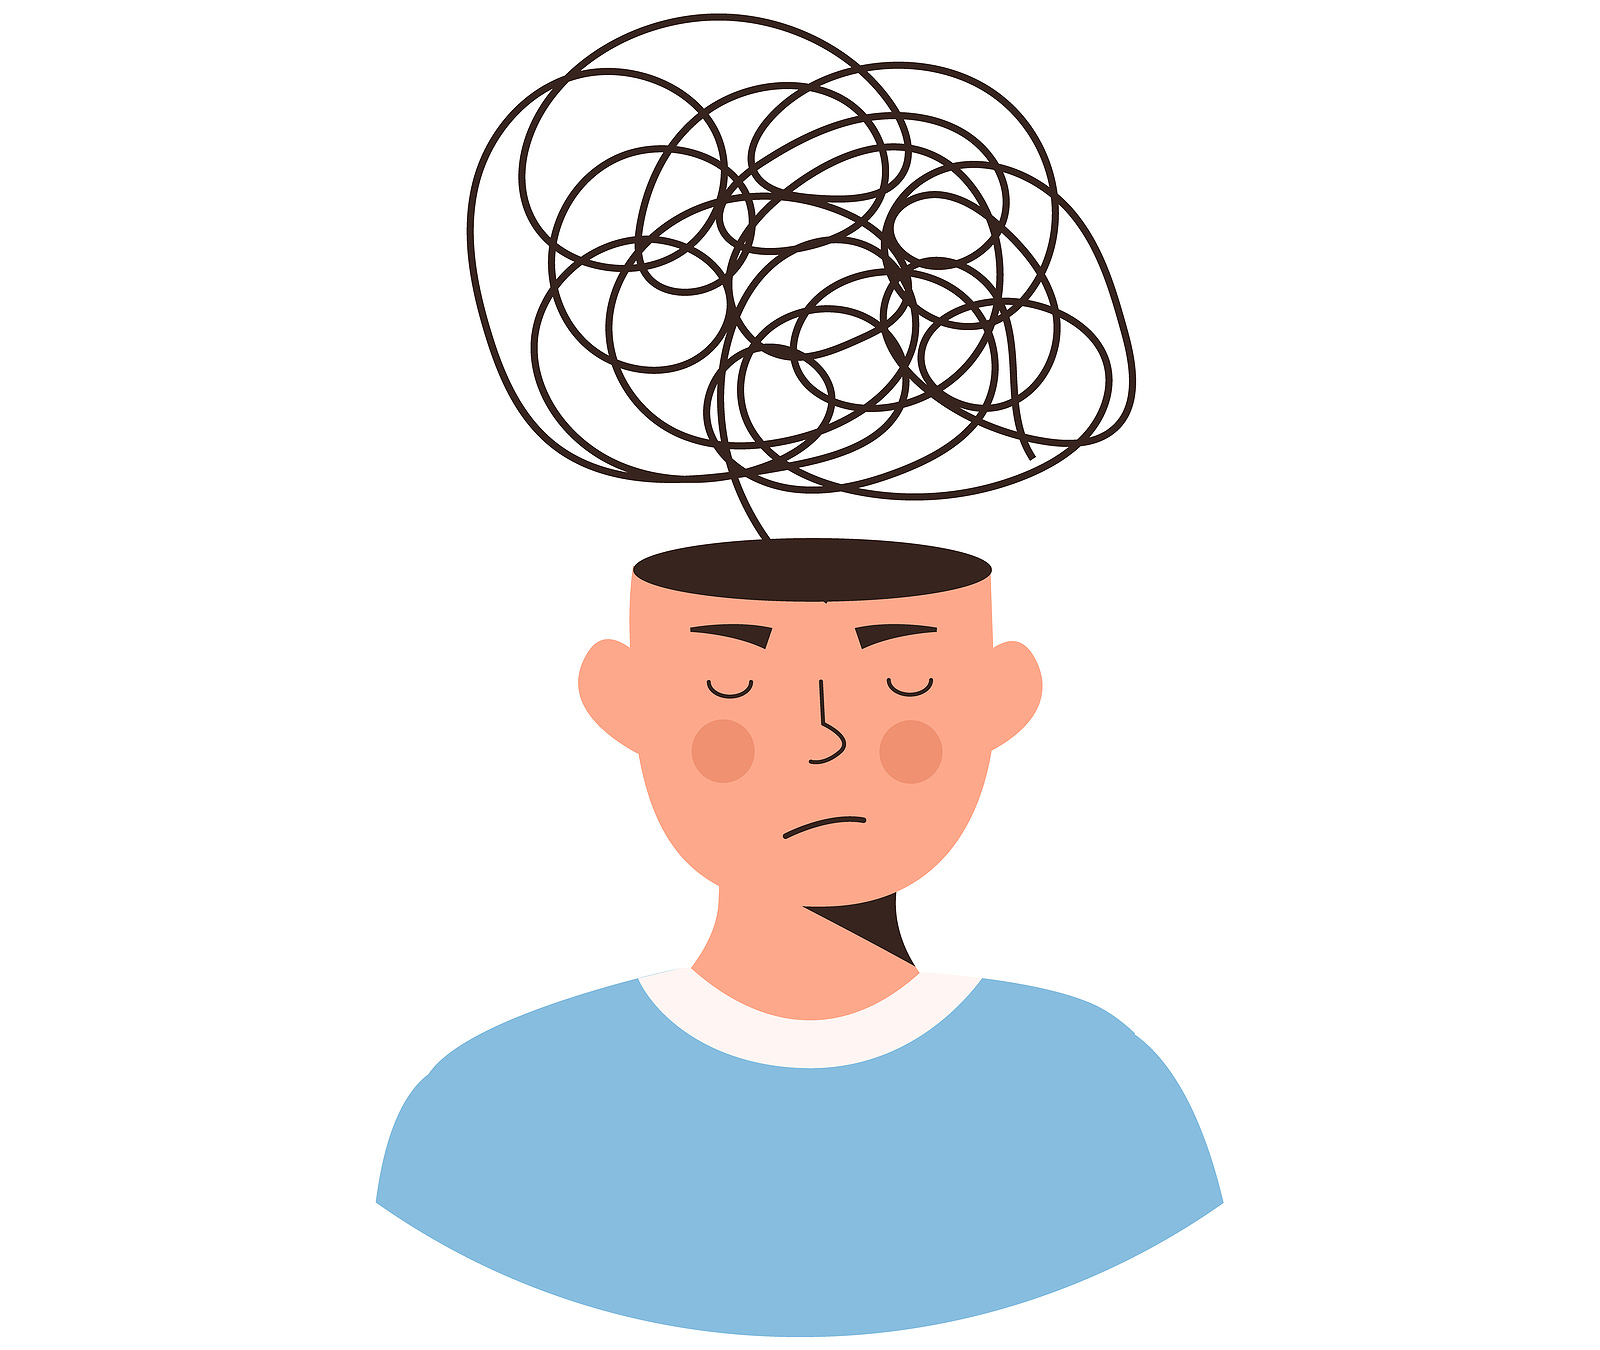  digital image of an illustration of a person wearing a blue shirt with a squiggly line coming out of their head. This image illustrates what thinking may be like for someone needing PTSD treatment near Baltimore, MD. Those struggling with PTSD and trauma symptoms can get help from trauma therapy in Baltimore, MD. 21209 | 21204